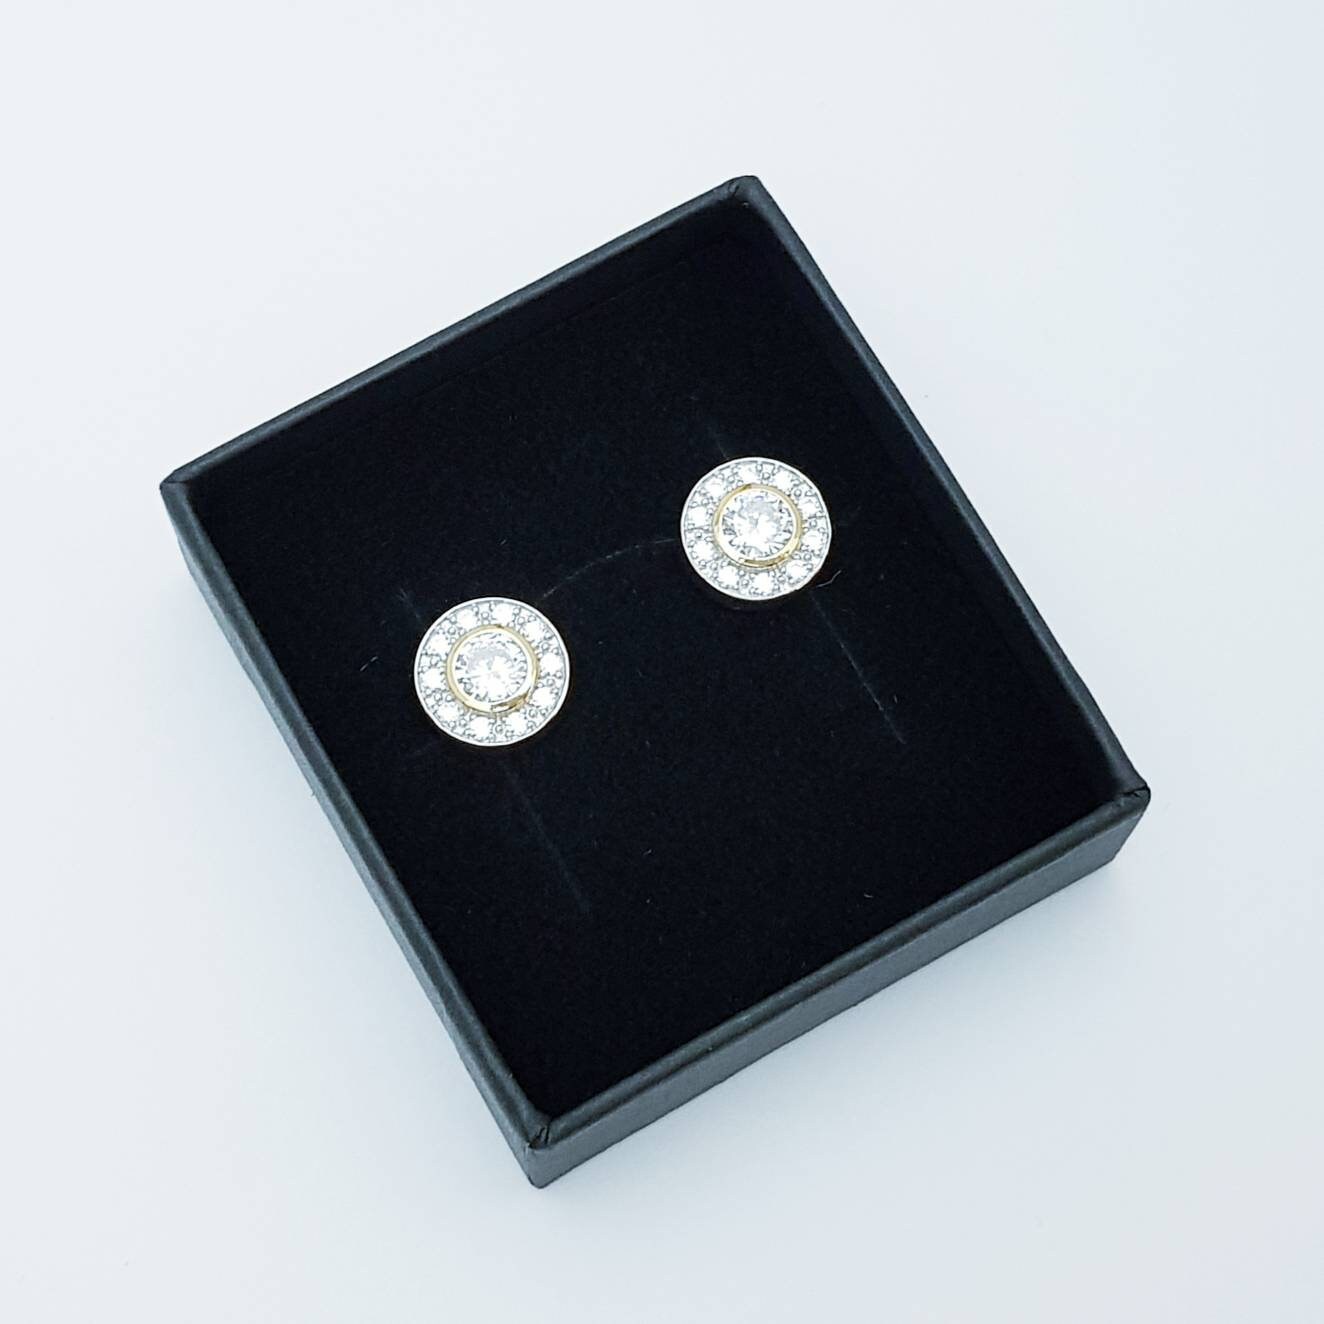 Gold plated sterling silver stud earrings with cubic zirconia, elegant round silver earrings, small stud earrings